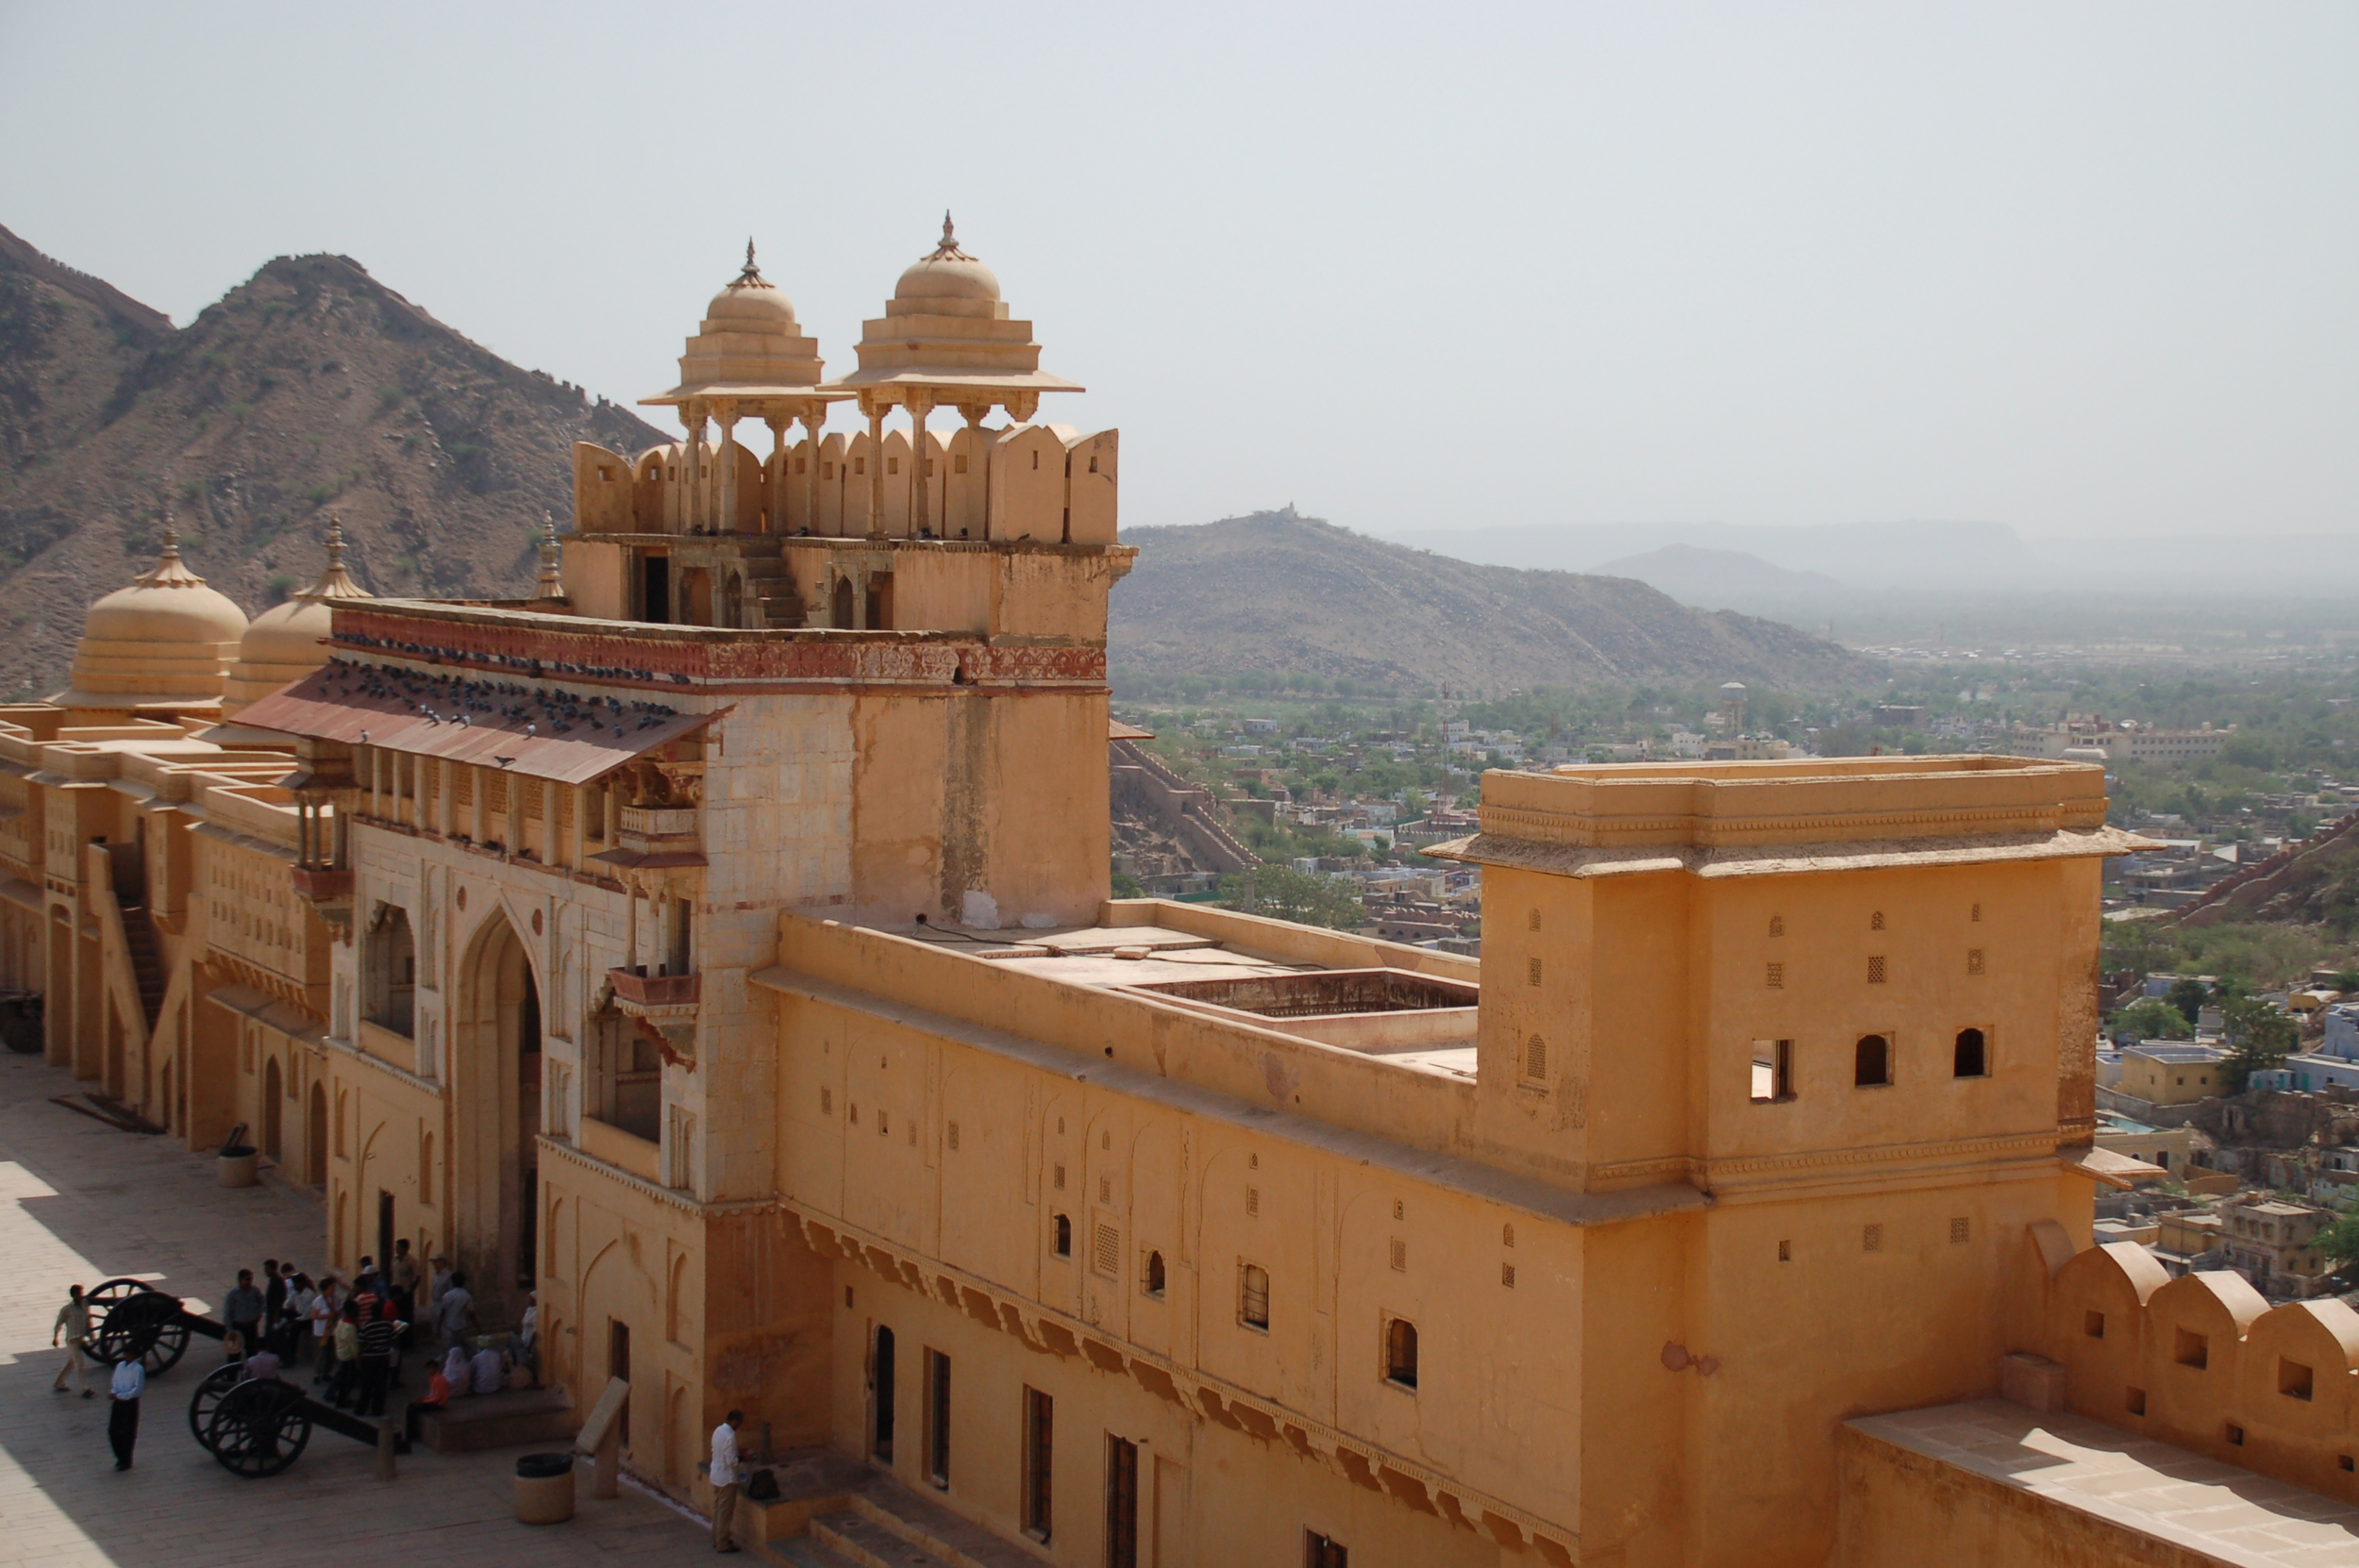 Sitting on top of Amber Fort